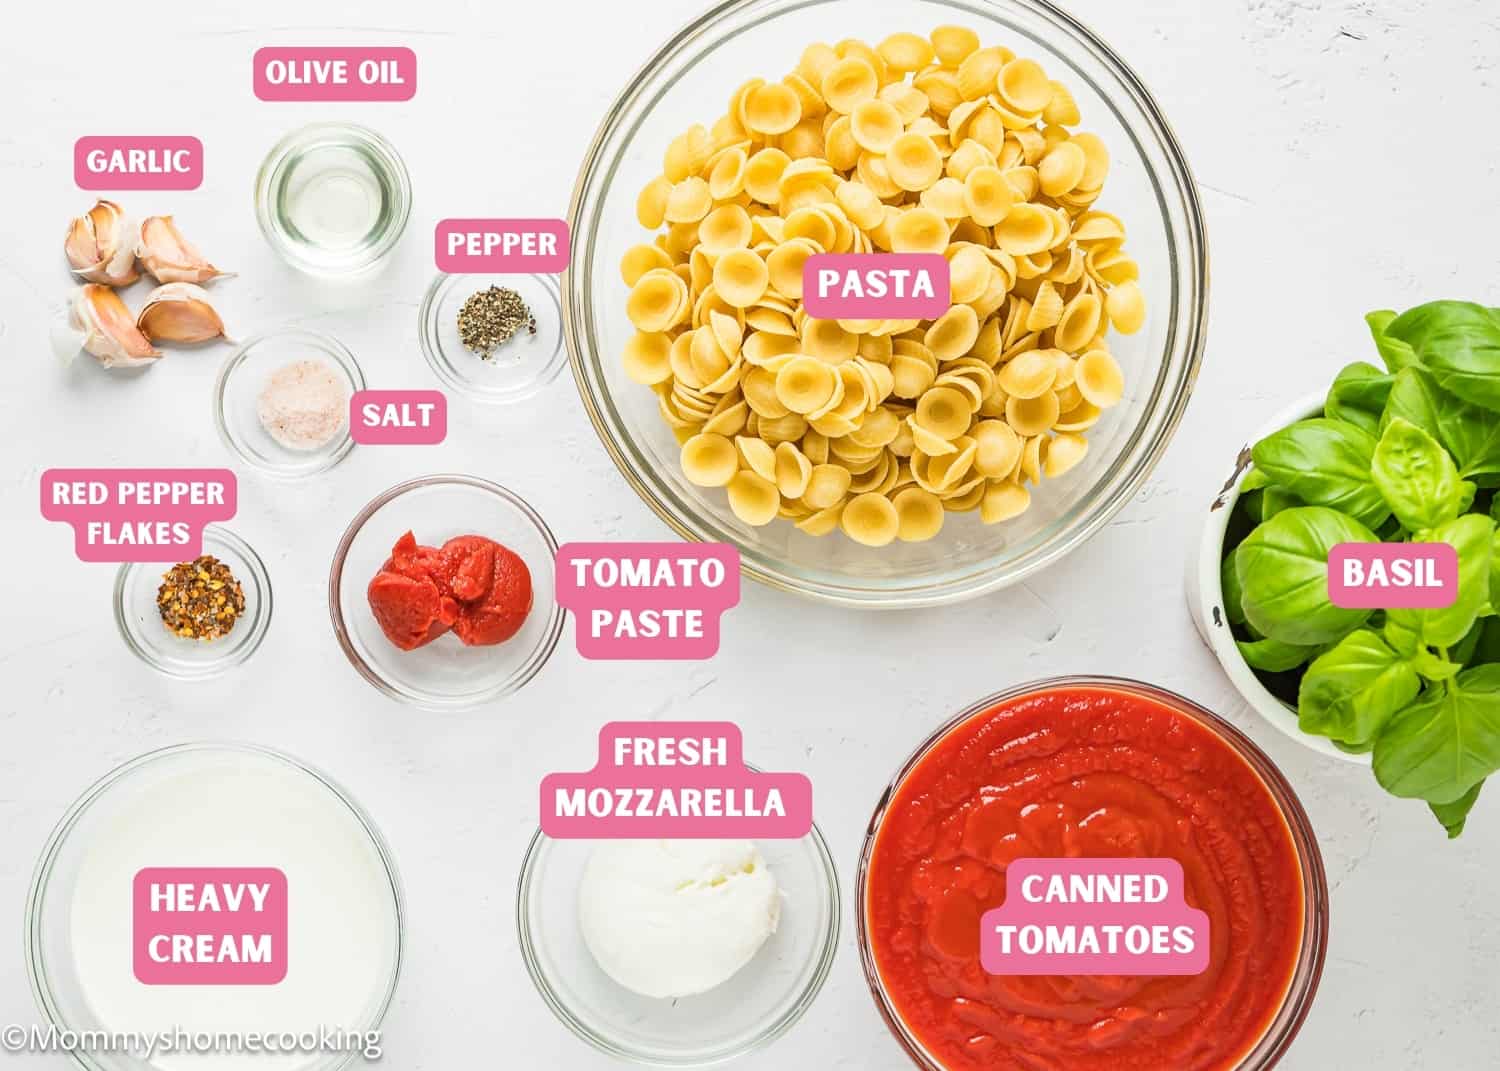 Ingredients needed to make Super Easy Creamy Tomato Pasta (With Secret Ingredient) with name tags.